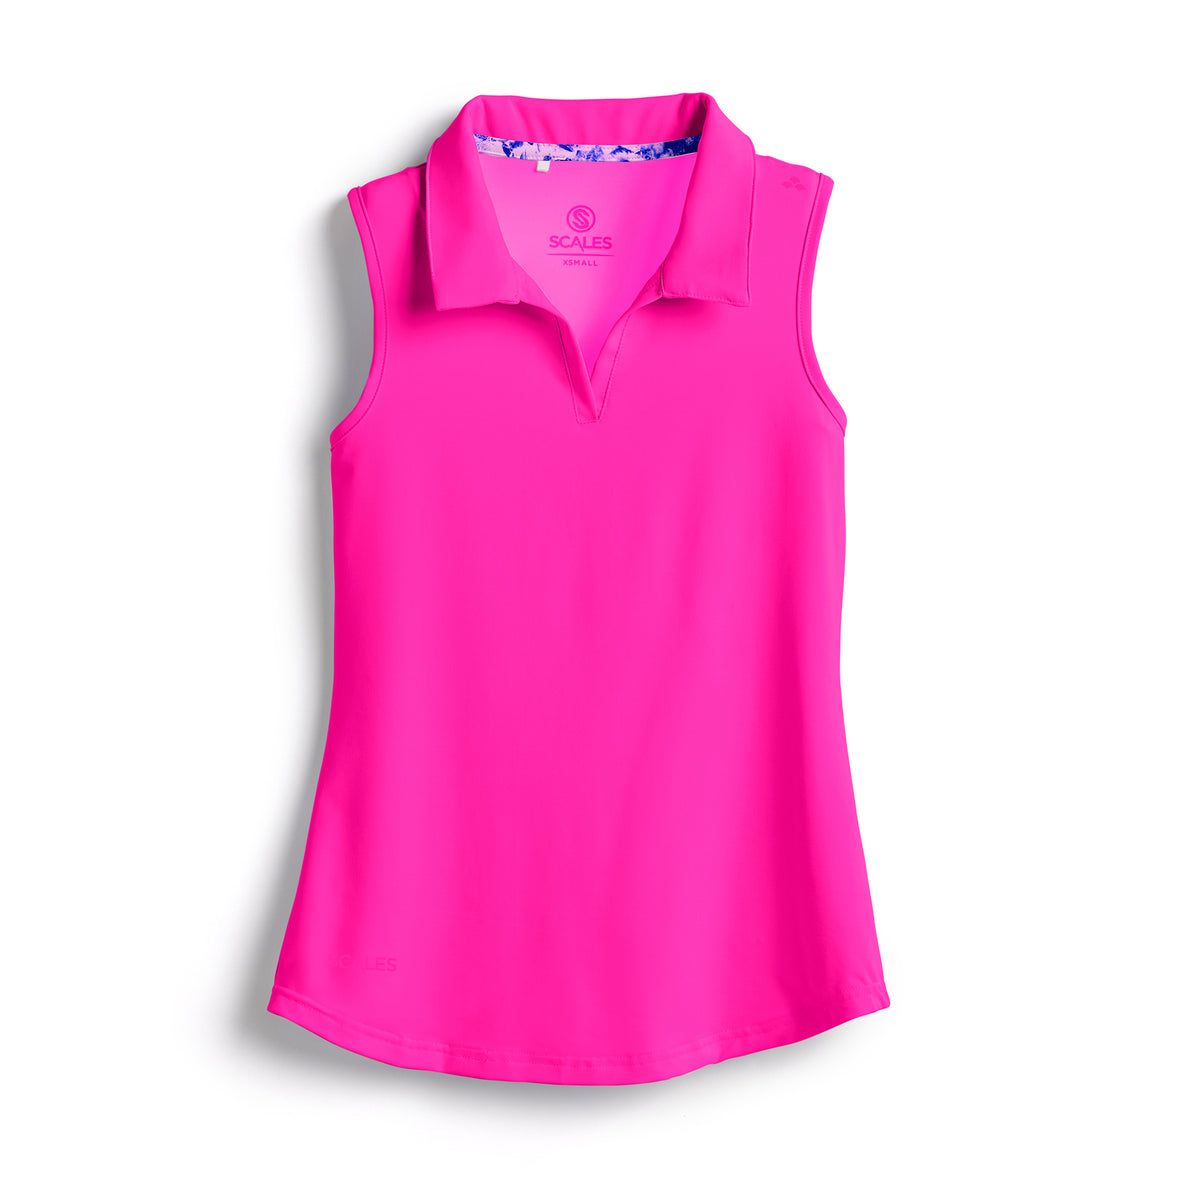 Offshore Core Womens Sleeveless Polo - Hot Pink / XS